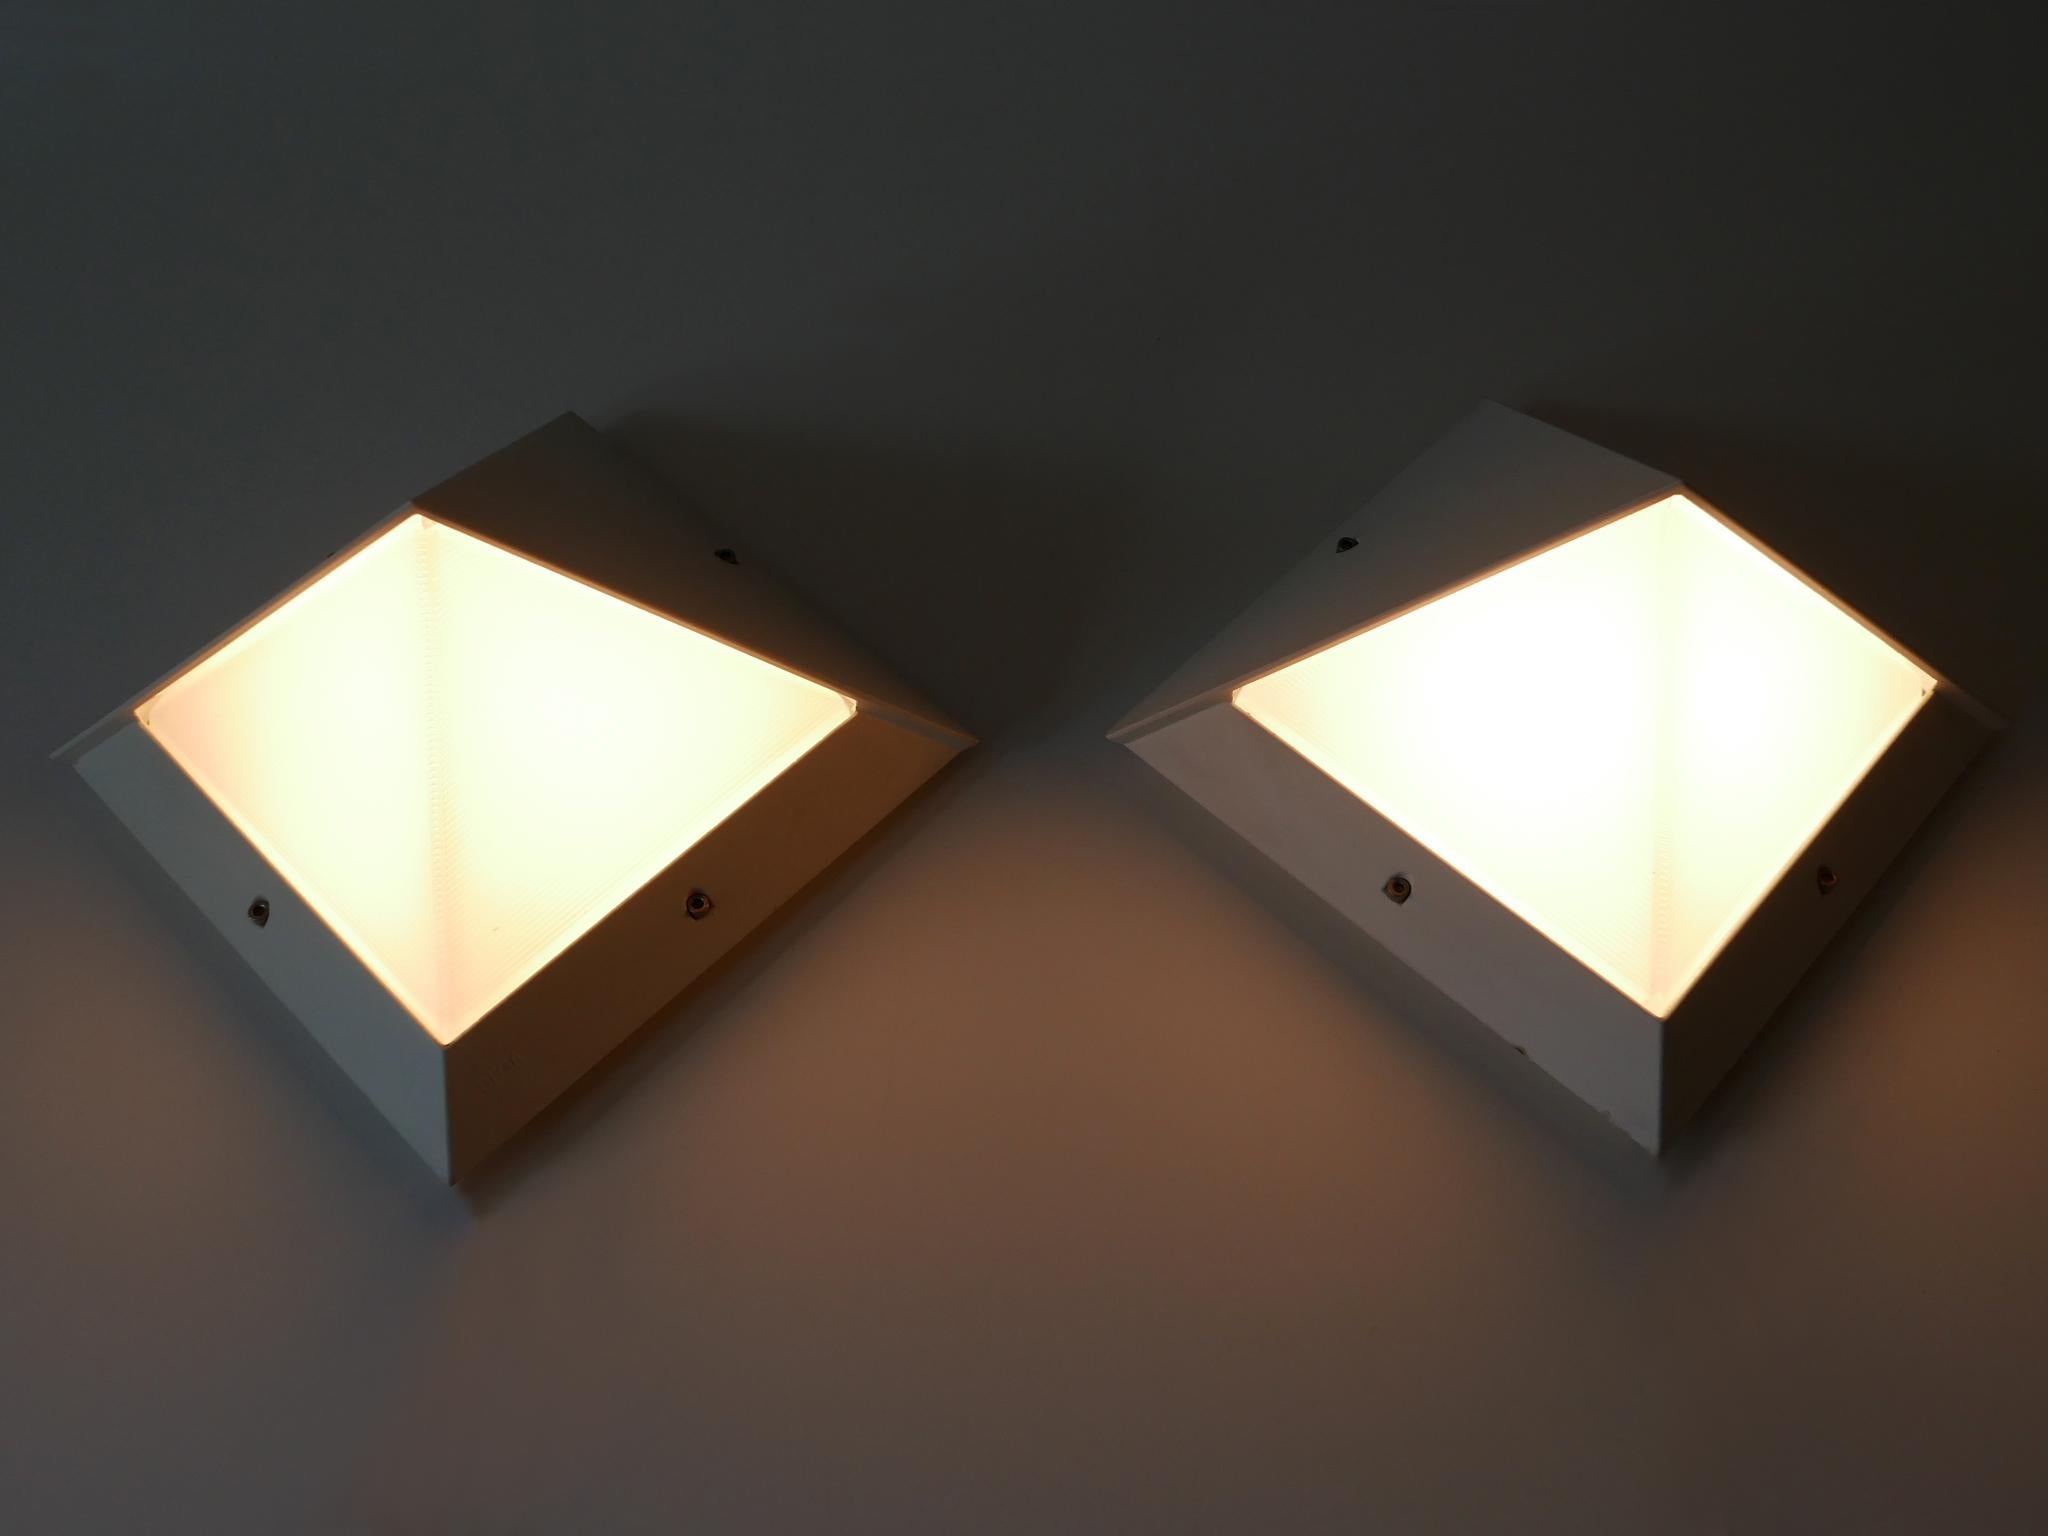 Cast Set of Two Large Outdoor Wall Lamps or Sconces by BEGA, 1980s, Germany For Sale